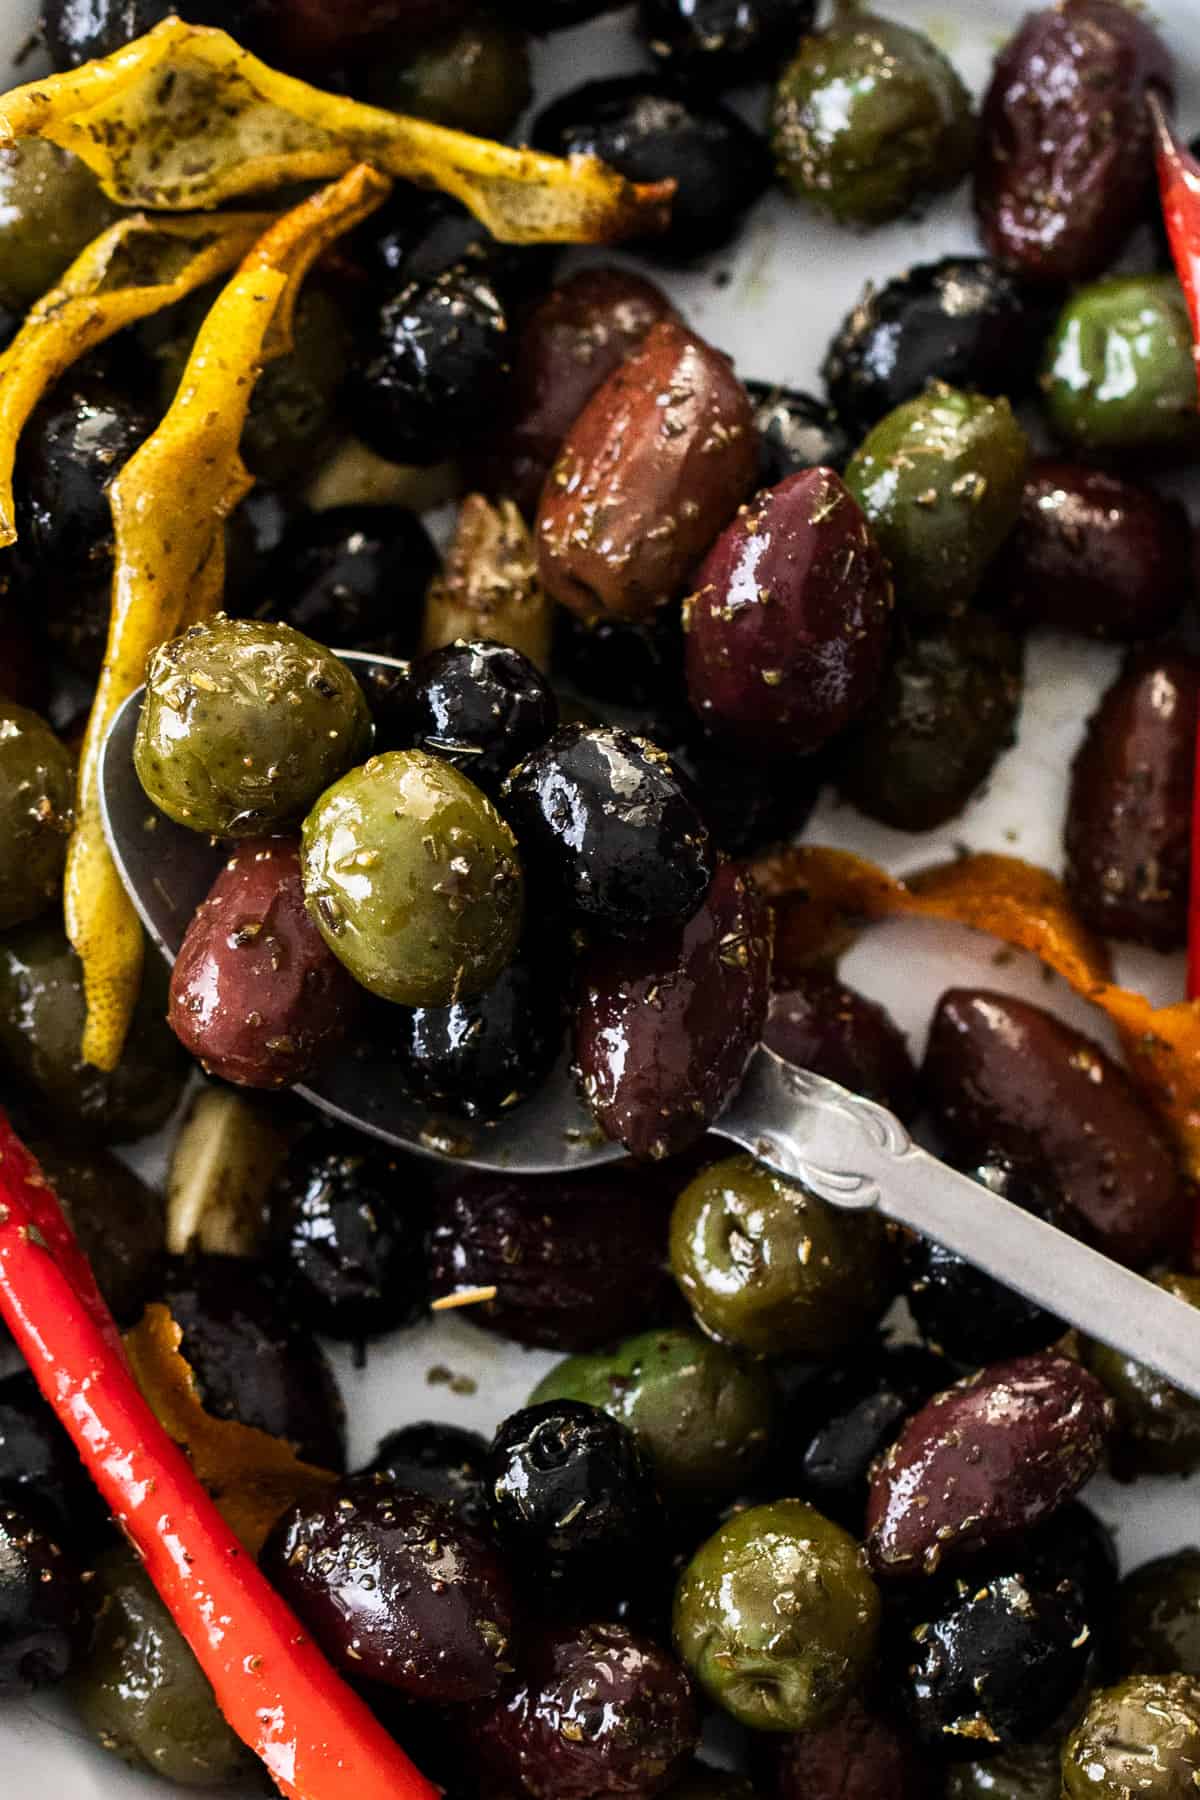 Up close shot of dish with roasted olives, and a silver spoon sitting in it.